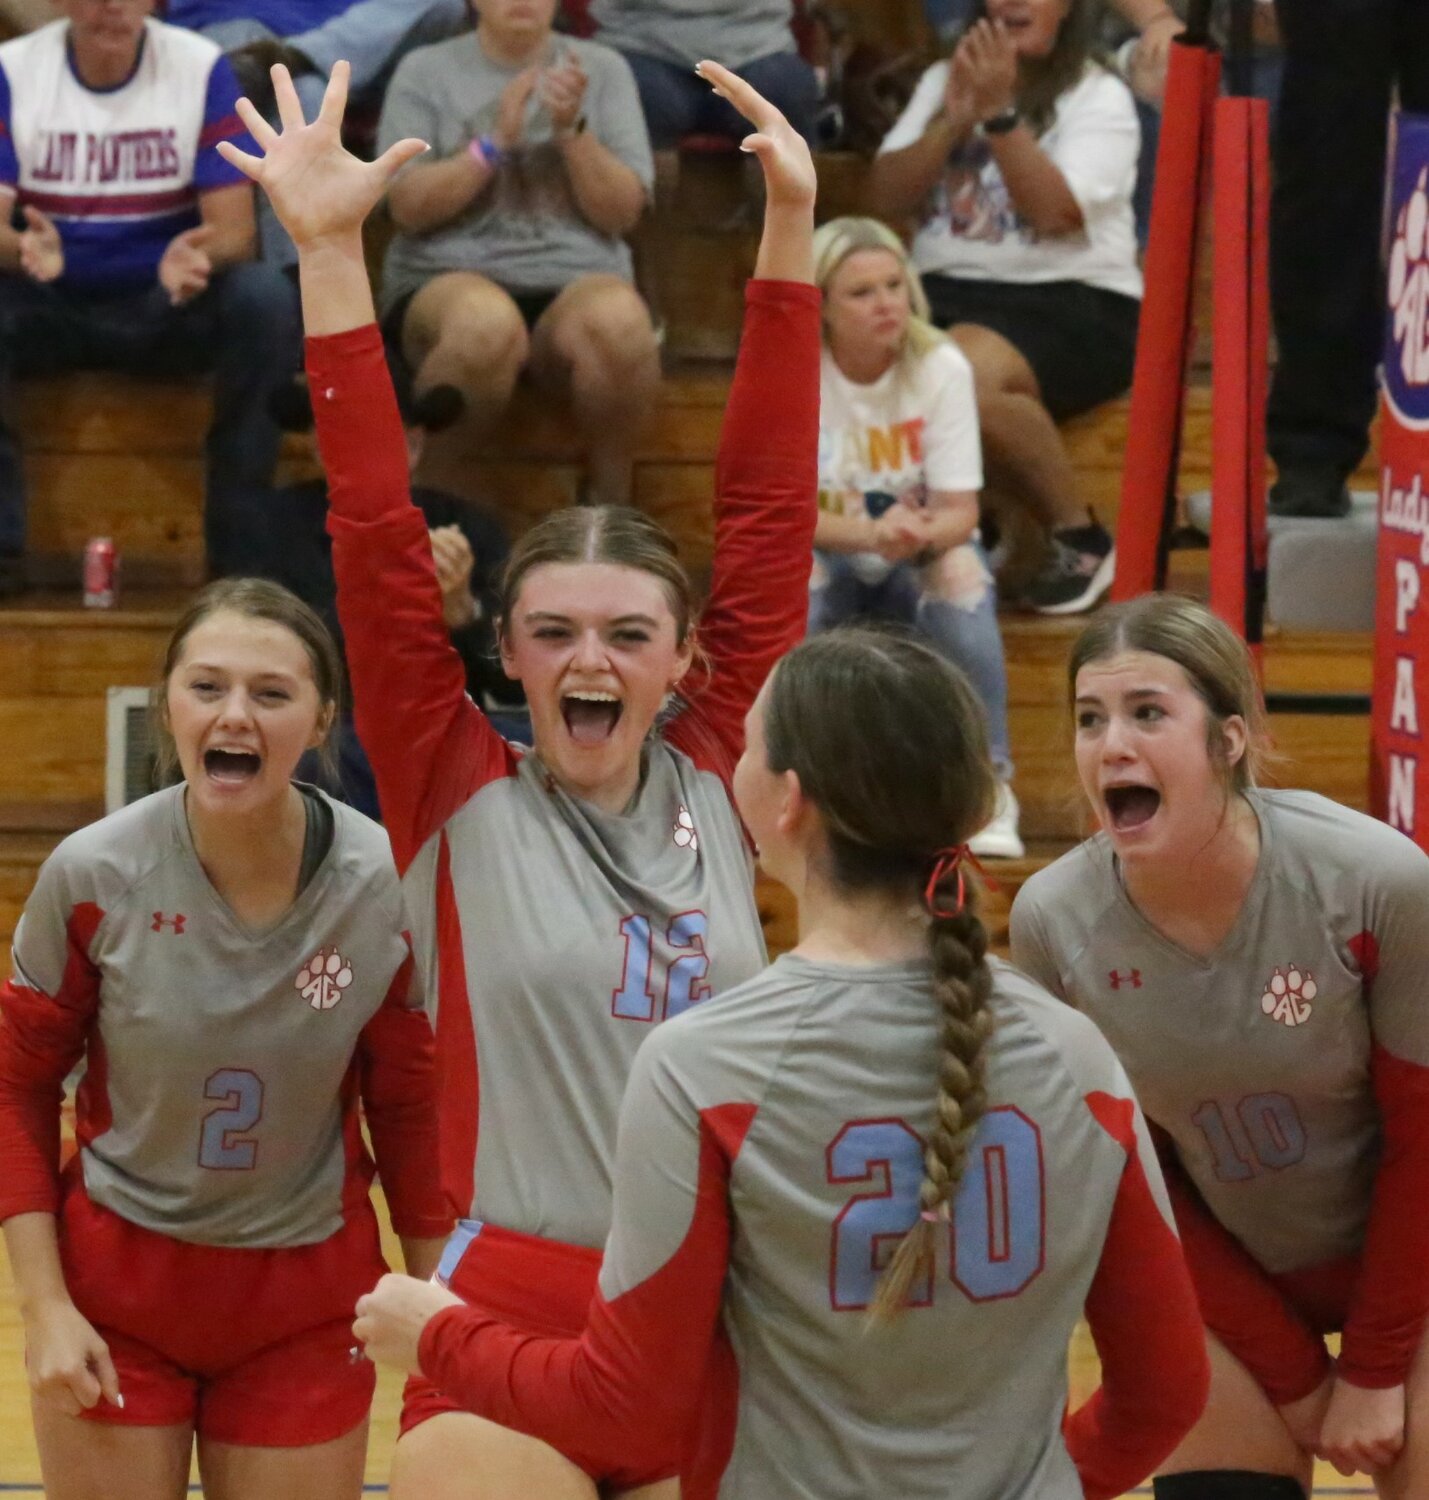 Lady Panthers Kalli Trimble (2), Alexis Wilmut (12), Hailey Crutchfield (20) and Lainey Teel (10) celebrate the first district match win last Friday.